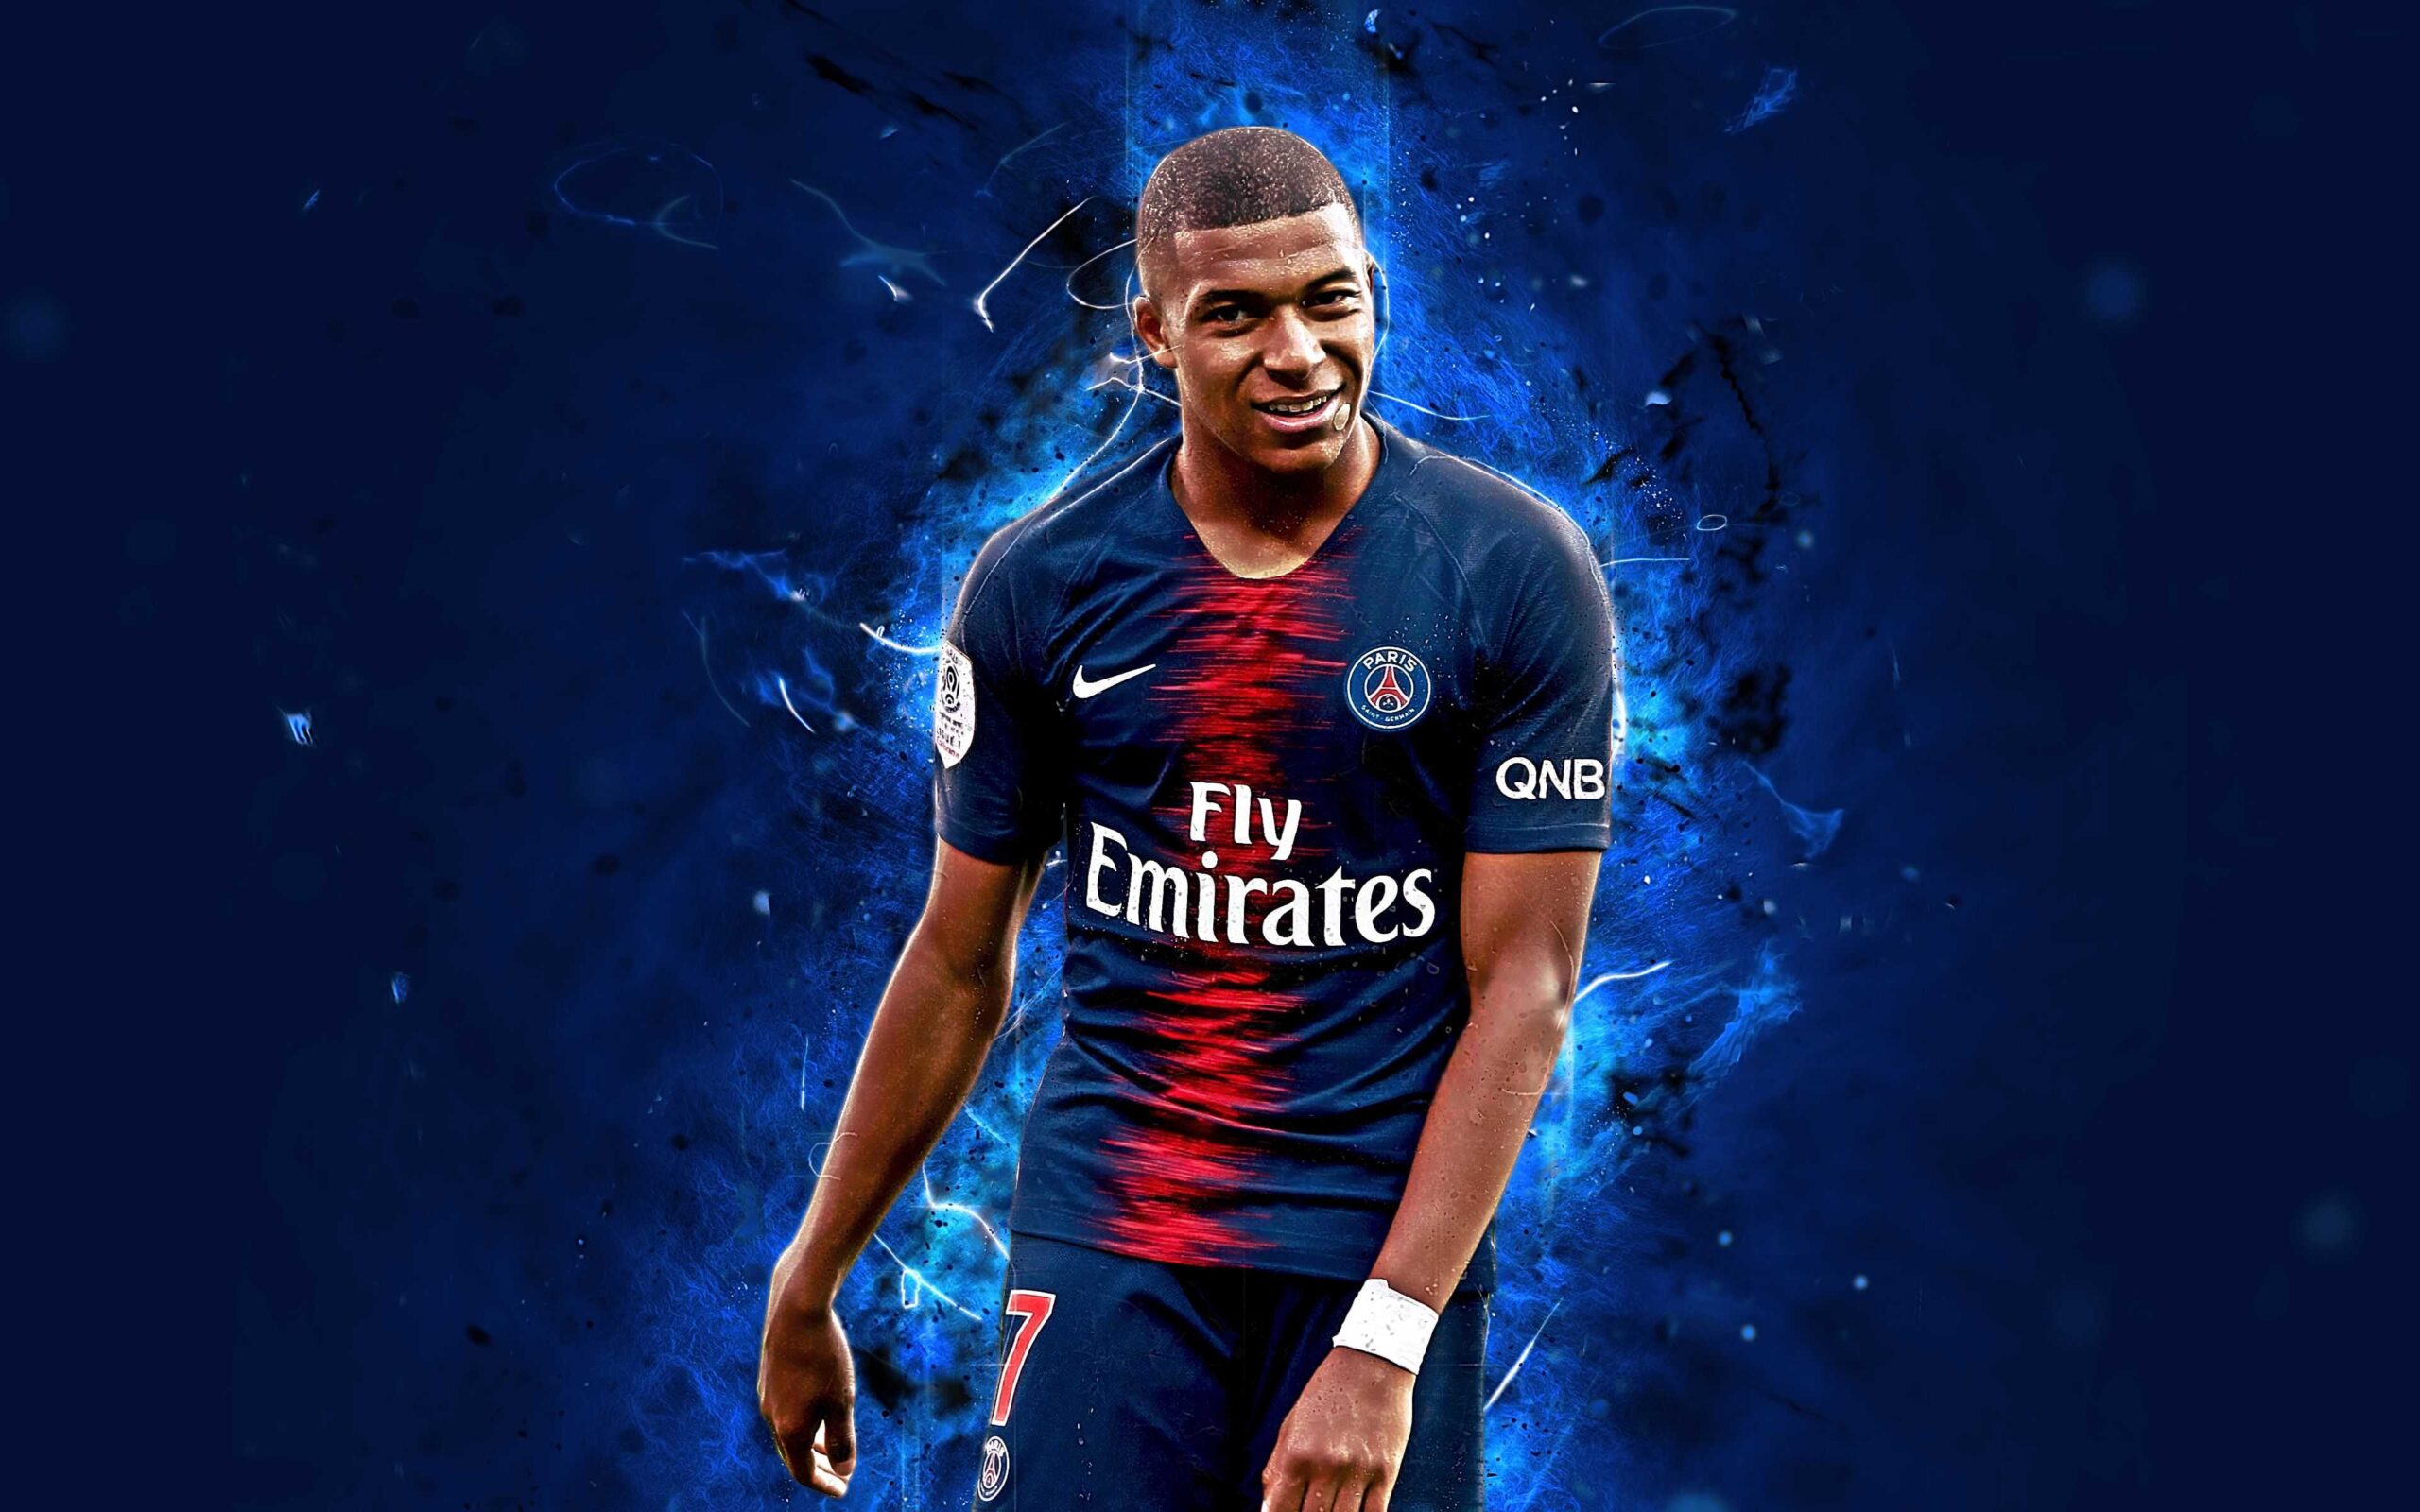 10. Mbappe Blue Hair Wallpaper for iPhone X - wide 2